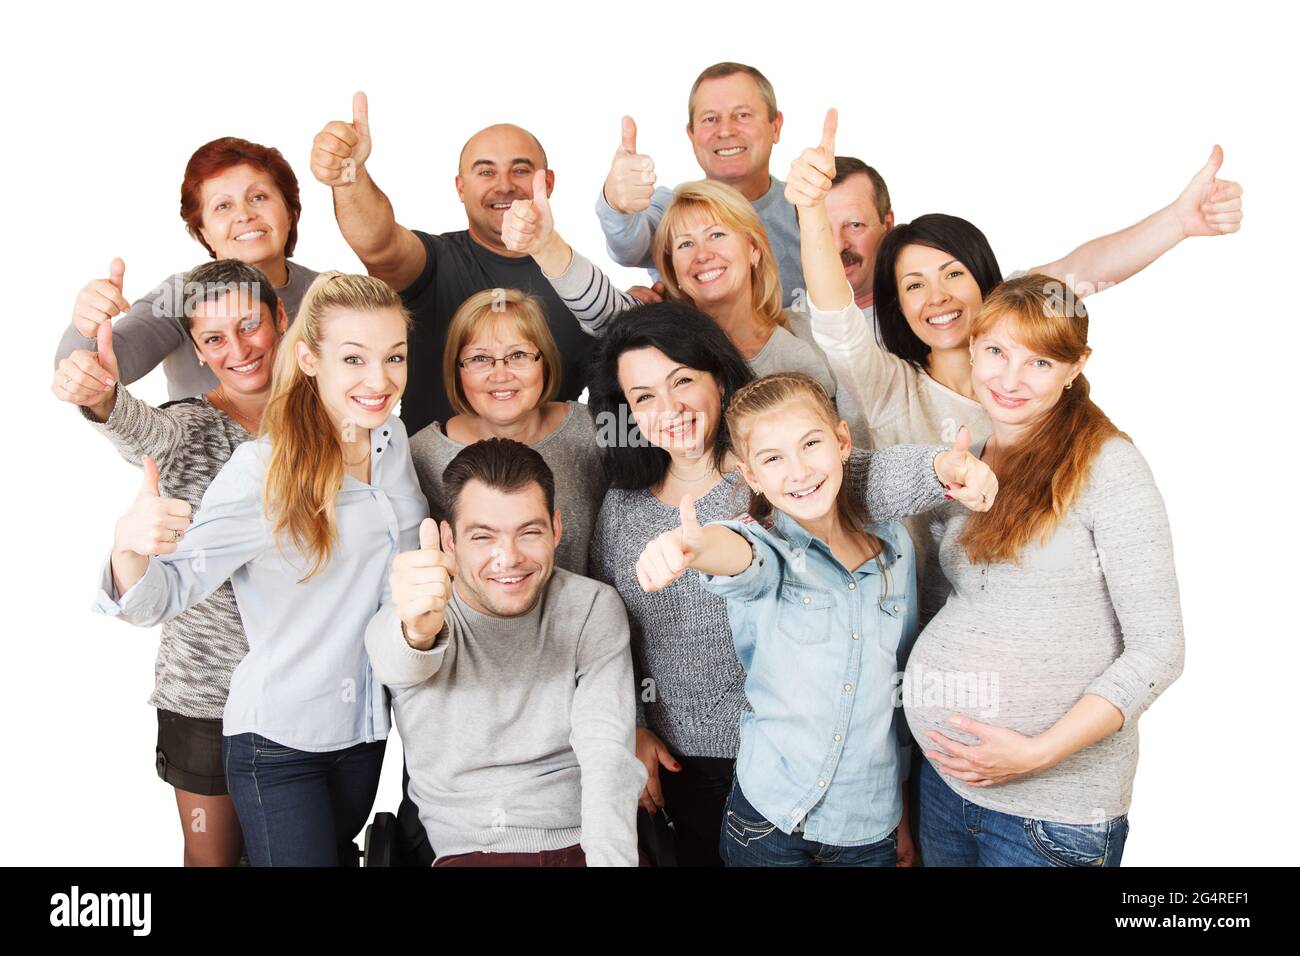 Large group of a Mixed Age people with Disabled Man  smiling together with their thumbs raised up. Isolated on white Stock Photo